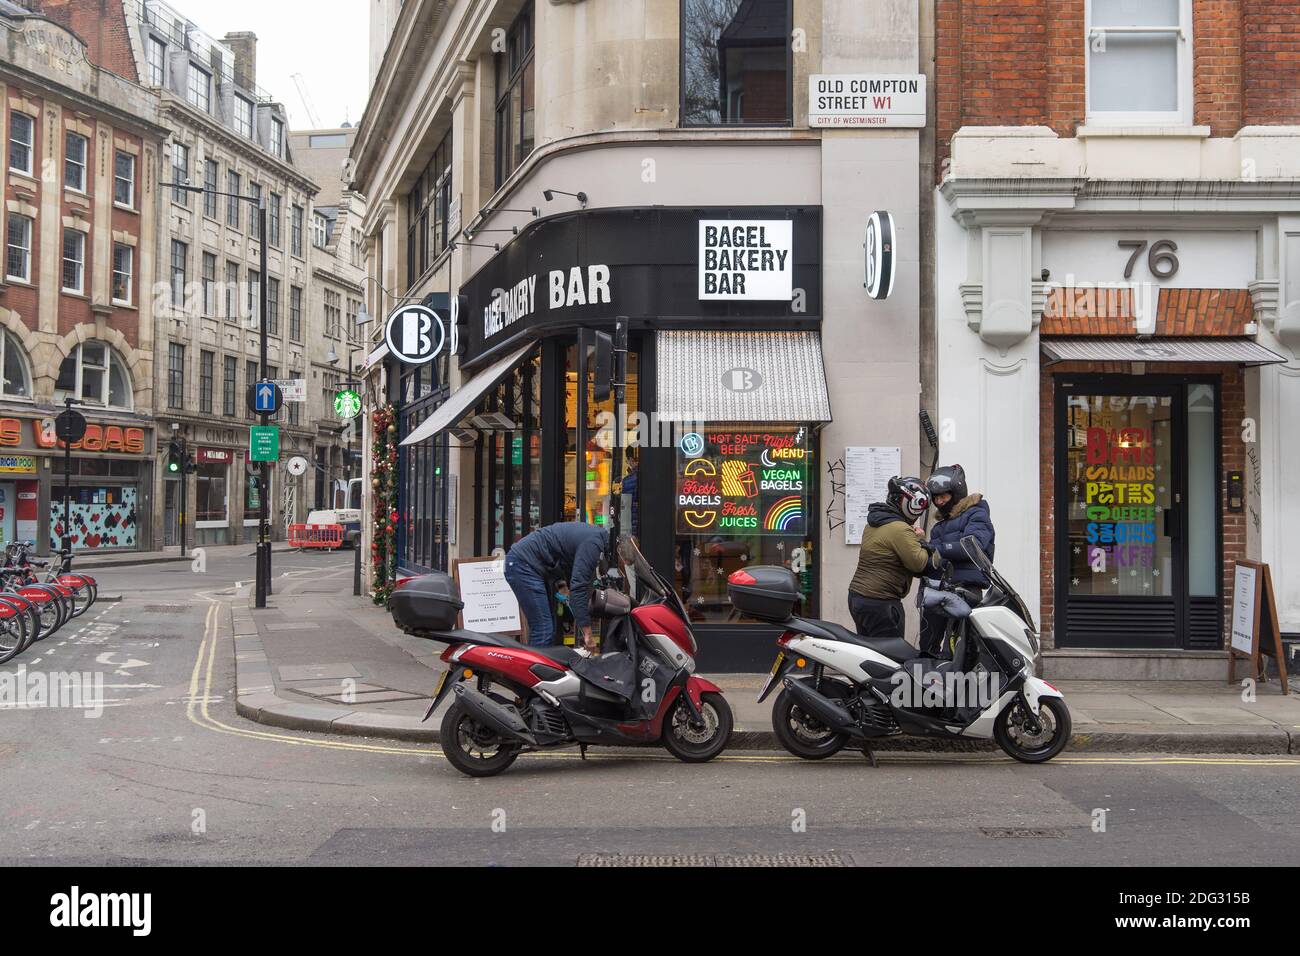 Moped delivery drivers wait outside a bakery on Old Compton Street, Soho. London Stock Photo